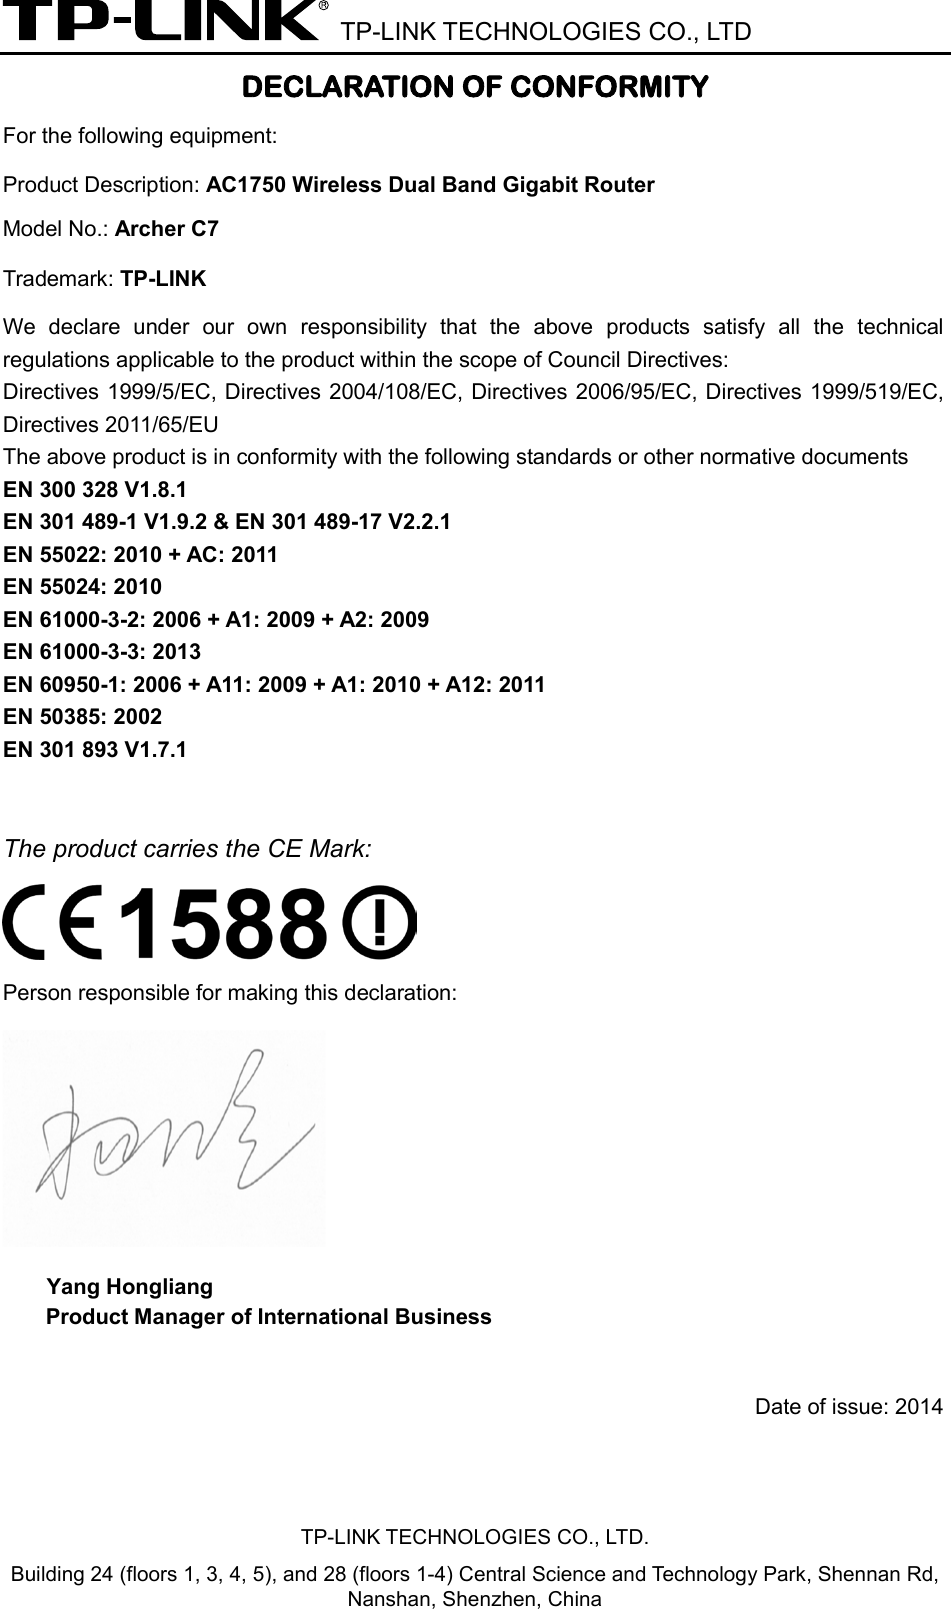  TP-LINK TECHNOLOGIES CO., LTD DECLARATION OF CONFORMITY For the following equipment: Product Description: AC1750 Wireless Dual Band Gigabit Router Model No.: Archer C7 Trademark: TP-LINK  We declare under our own responsibility that the above products satisfy all the technical regulations applicable to the product within the scope of Council Directives:     Directives 1999/5/EC, Directives 2004/108/EC, Directives 2006/95/EC, Directives 1999/519/EC, Directives 2011/65/EU The above product is in conformity with the following standards or other normative documents EN 300 328 V1.8.1     EN 301 489-1 V1.9.2 &amp; EN 301 489-17 V2.2.1     EN 55022: 2010 + AC: 2011 EN 55024: 2010 EN 61000-3-2: 2006 + A1: 2009 + A2: 2009 EN 61000-3-3: 2013 EN 60950-1: 2006 + A11: 2009 + A1: 2010 + A12: 2011     EN 50385: 2002   EN 301 893 V1.7.1  The product carries the CE Mark:  Person responsible for making this declaration:  Yang Hongliang Product Manager of International Business    Date of issue: 2014TP-LINK TECHNOLOGIES CO., LTD. Building 24 (floors 1, 3, 4, 5), and 28 (floors 1-4) Central Science and Technology Park, Shennan Rd, Nanshan, Shenzhen, China 